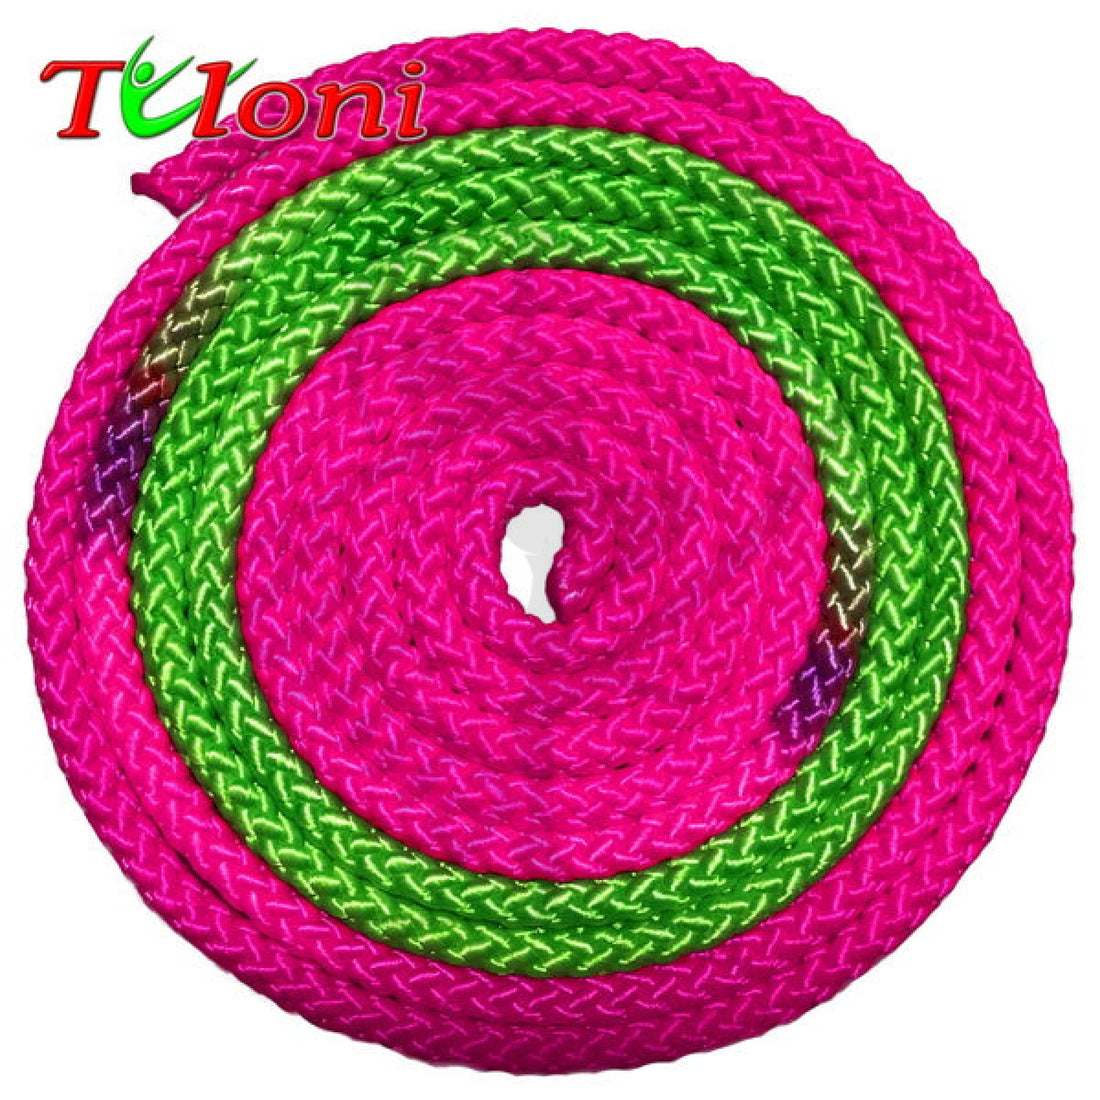 Tuloni Multicolour Rope 3M Pink X Green Pink Ropes